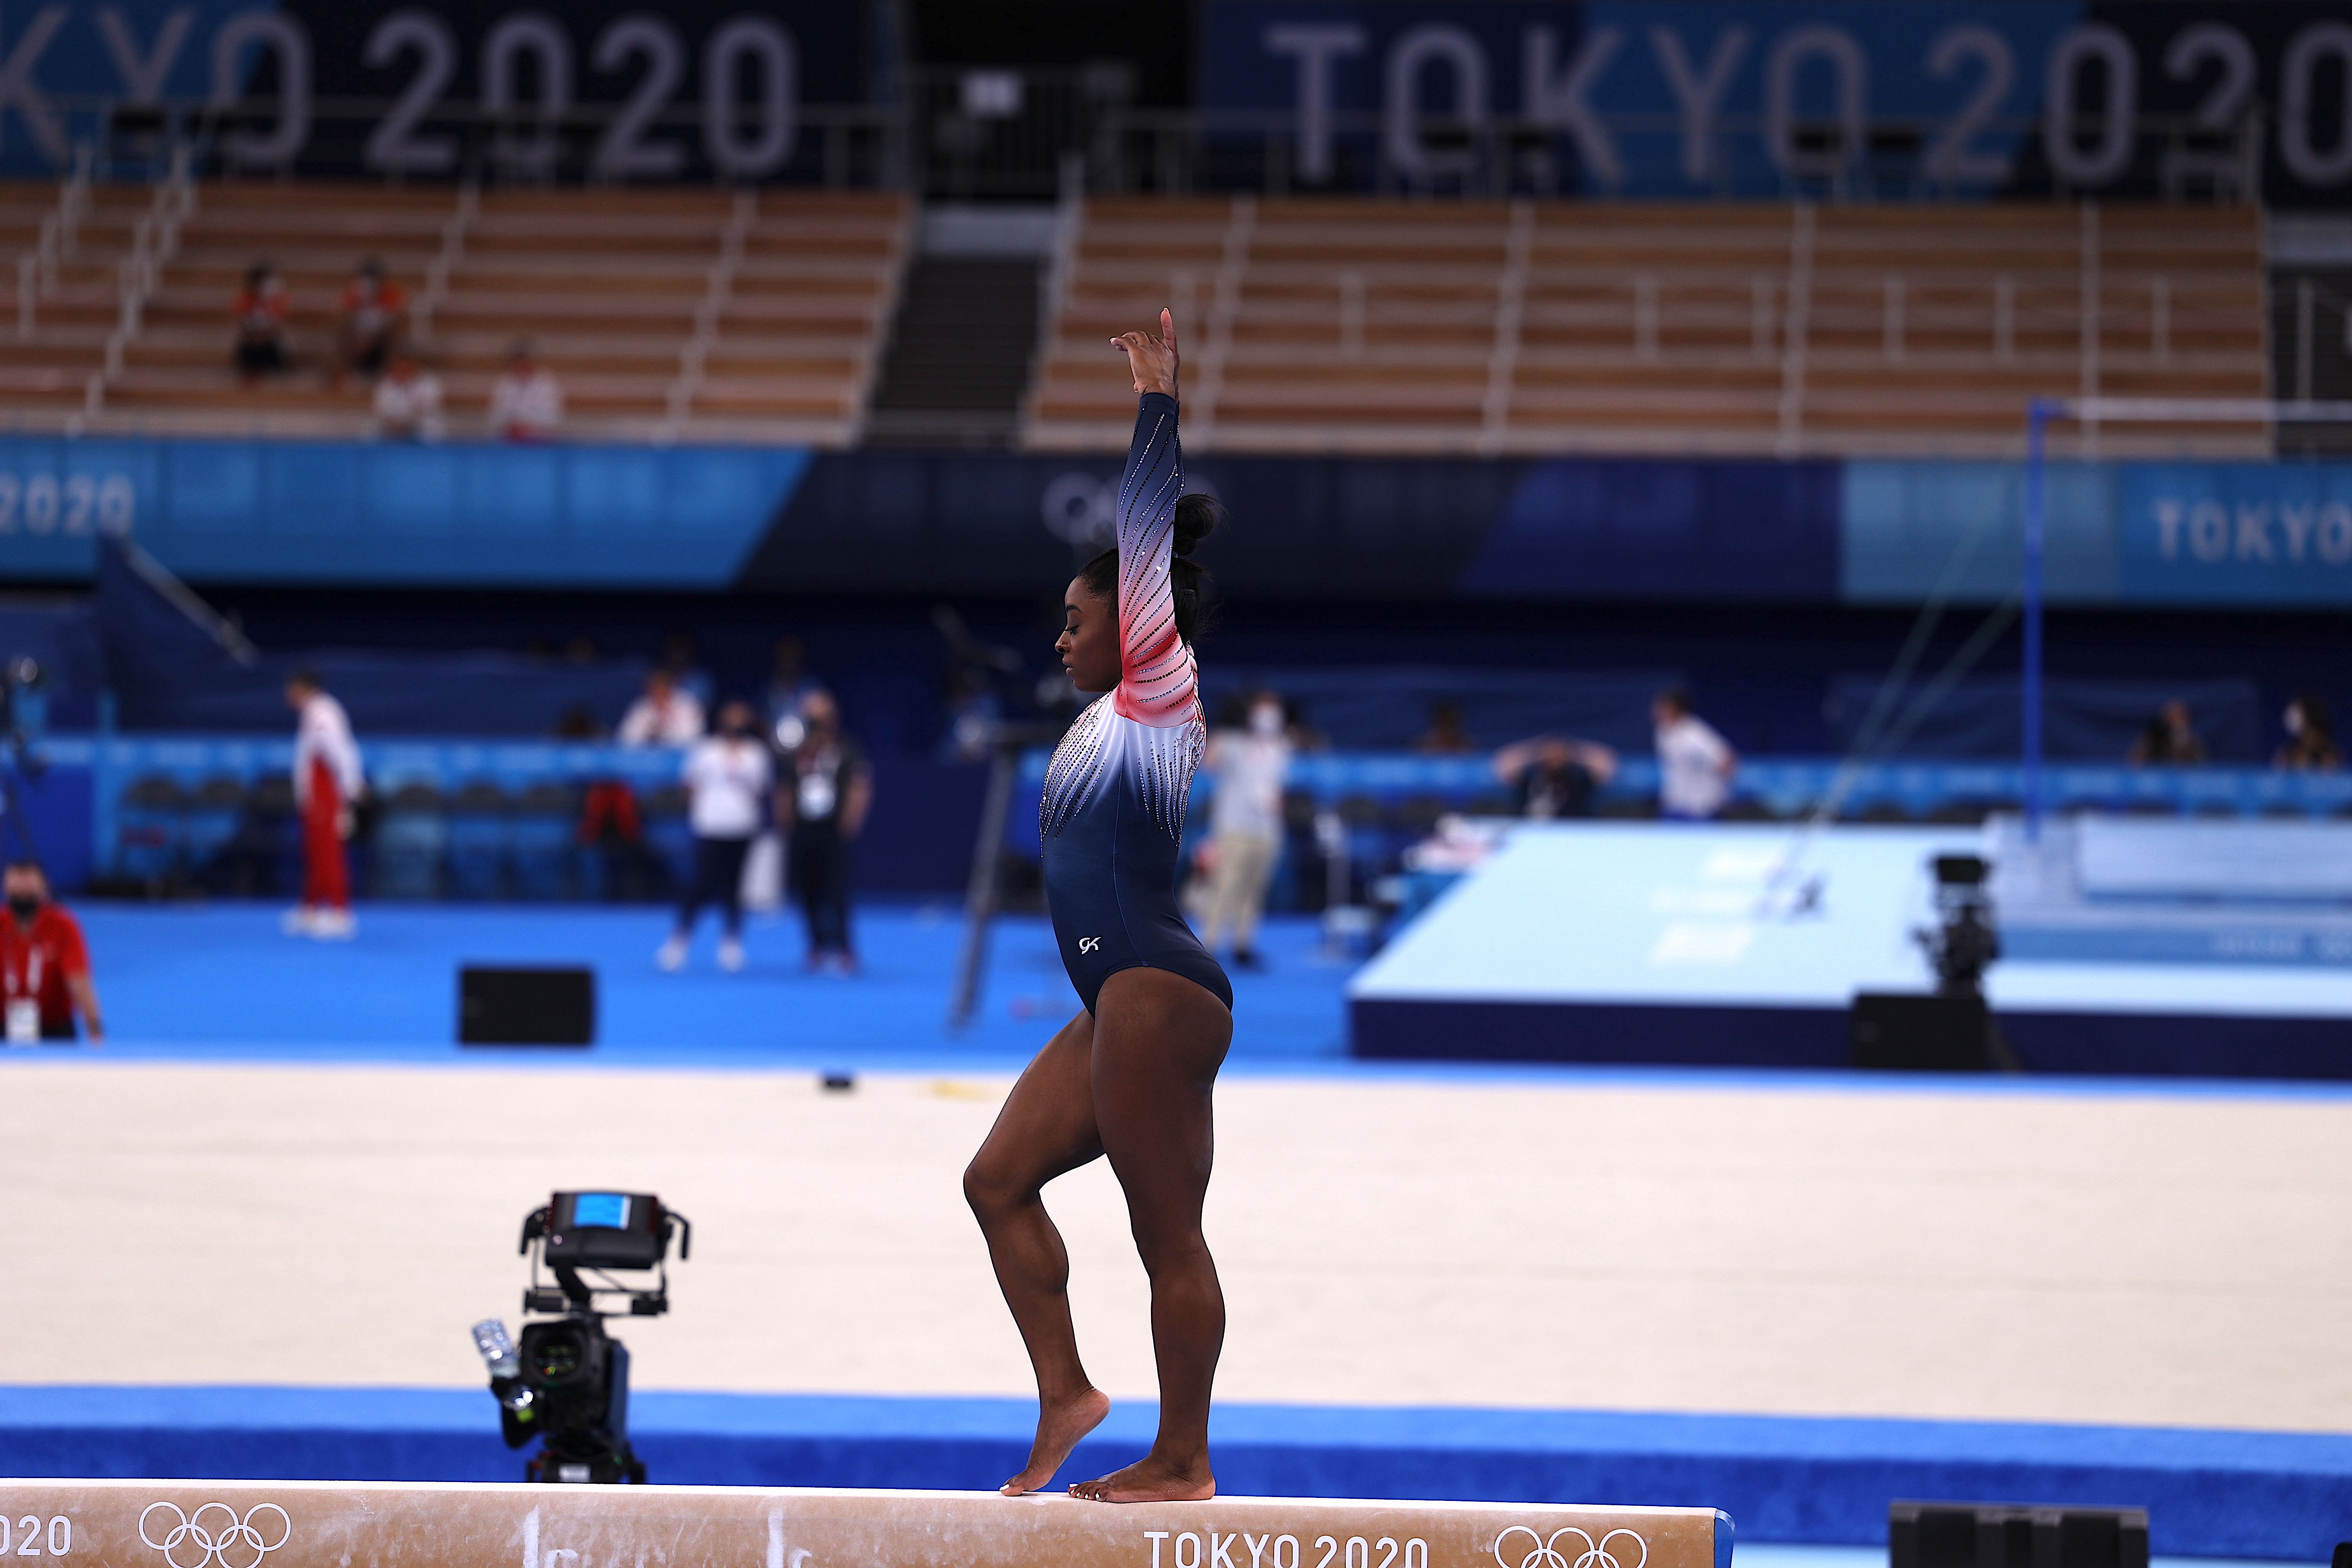 Simone Biles warms up in the gymnastics at the Tokyo Olympic Games on Tuesday.